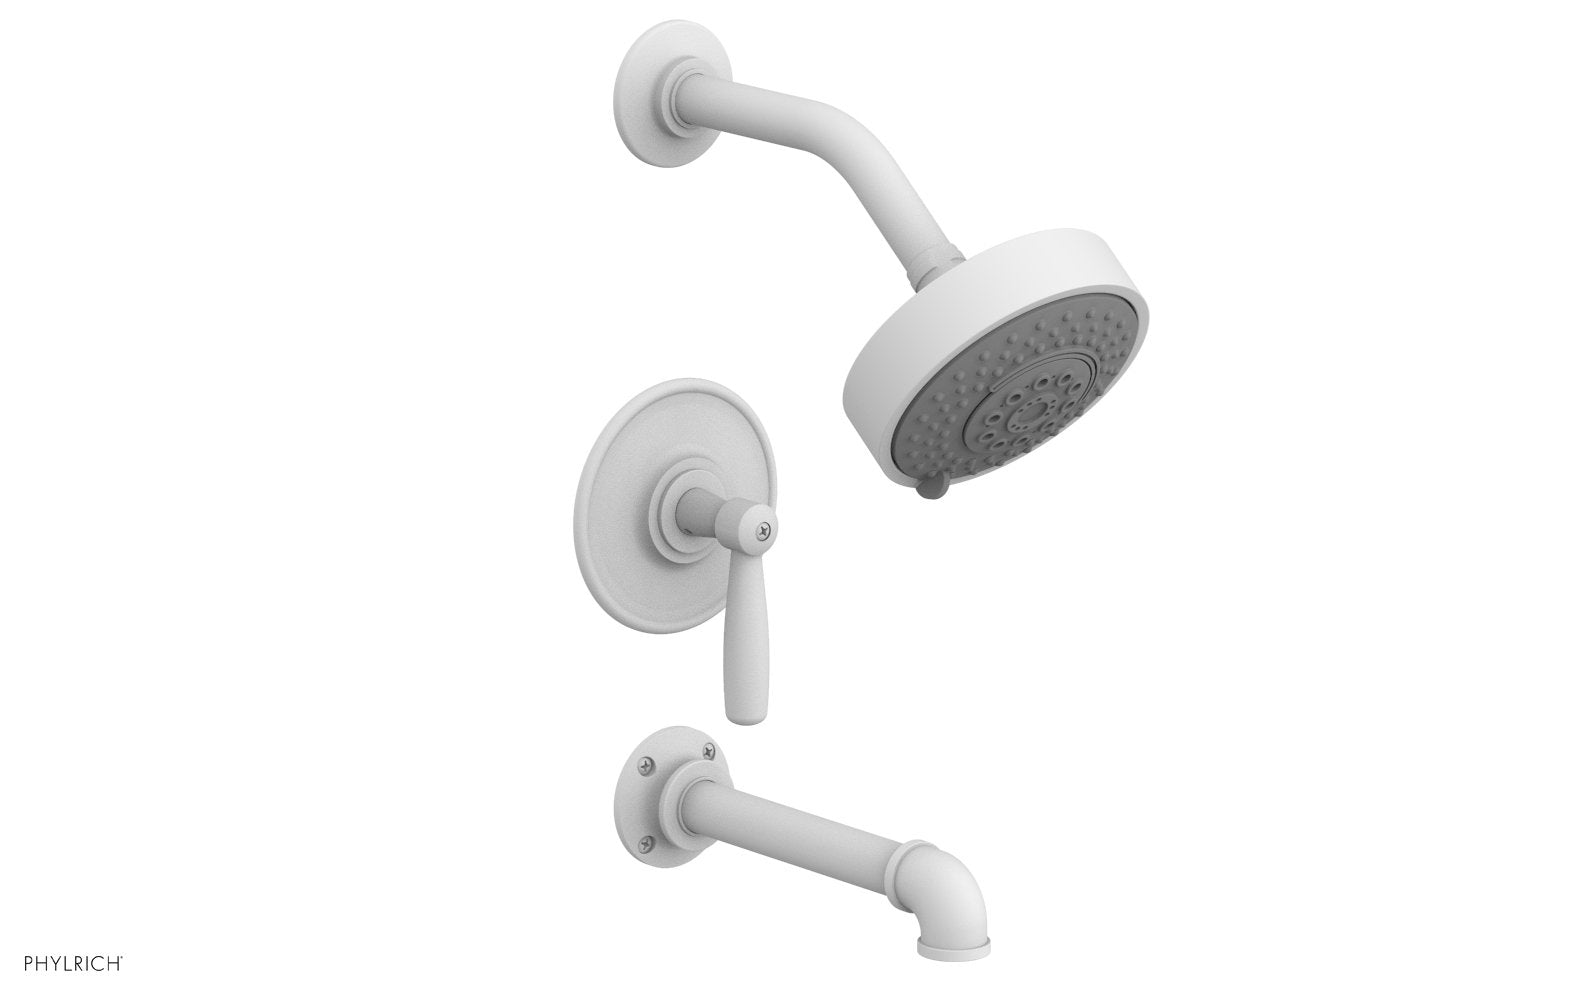 Phylrich WORKS 2 Pressure Balance Tub and Shower Set - Lever Handle